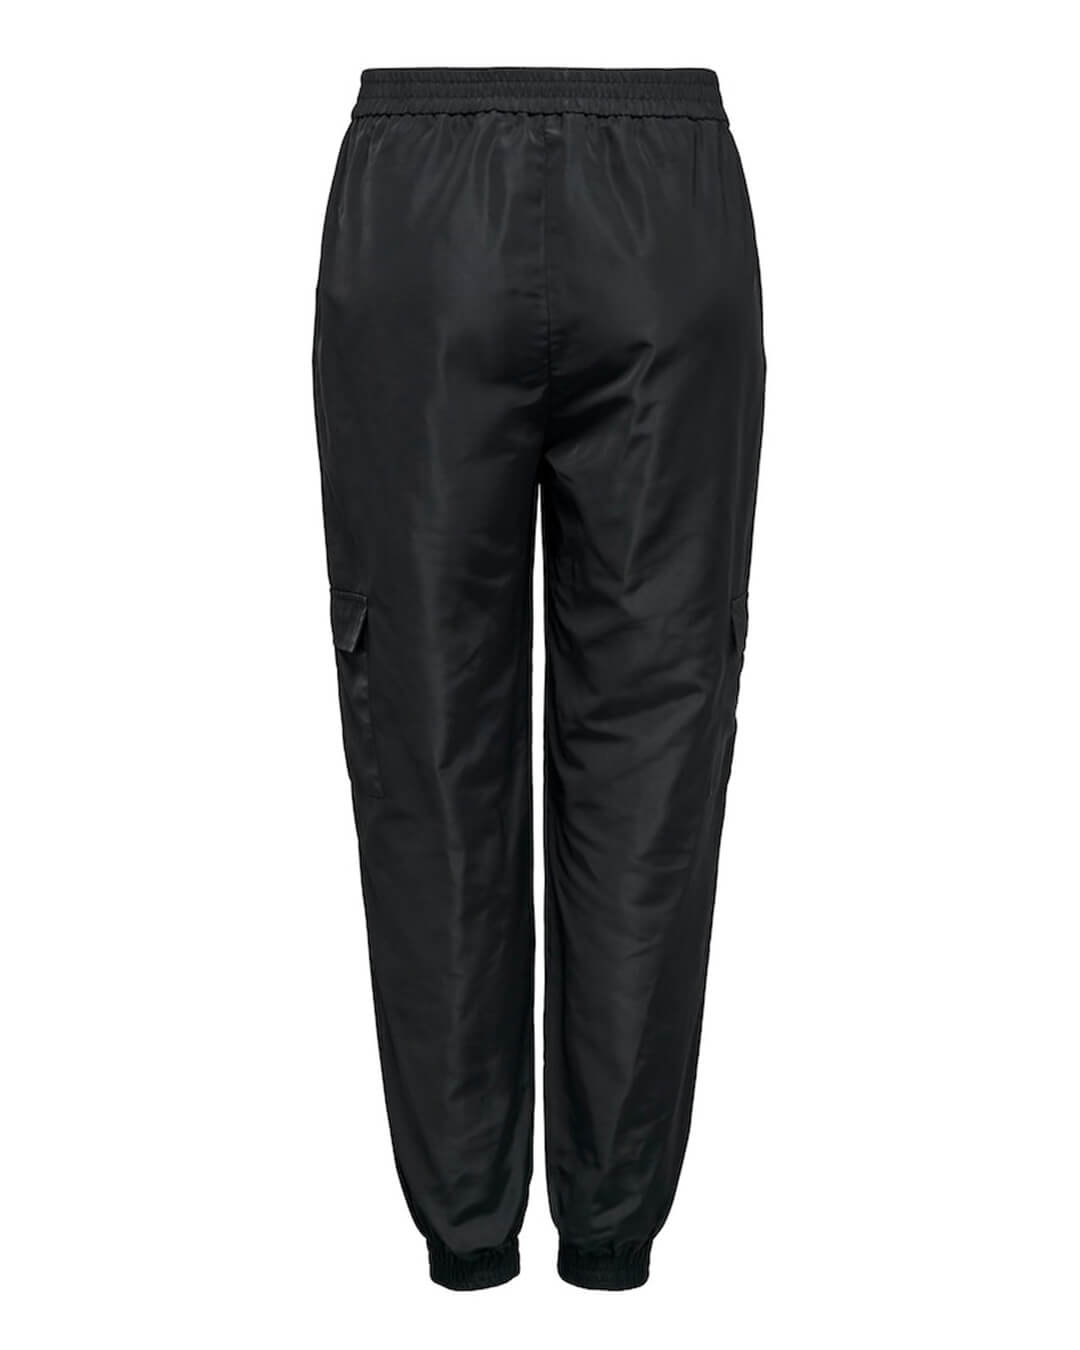 Only Trousers Only Faduma Black Cargo Trousers